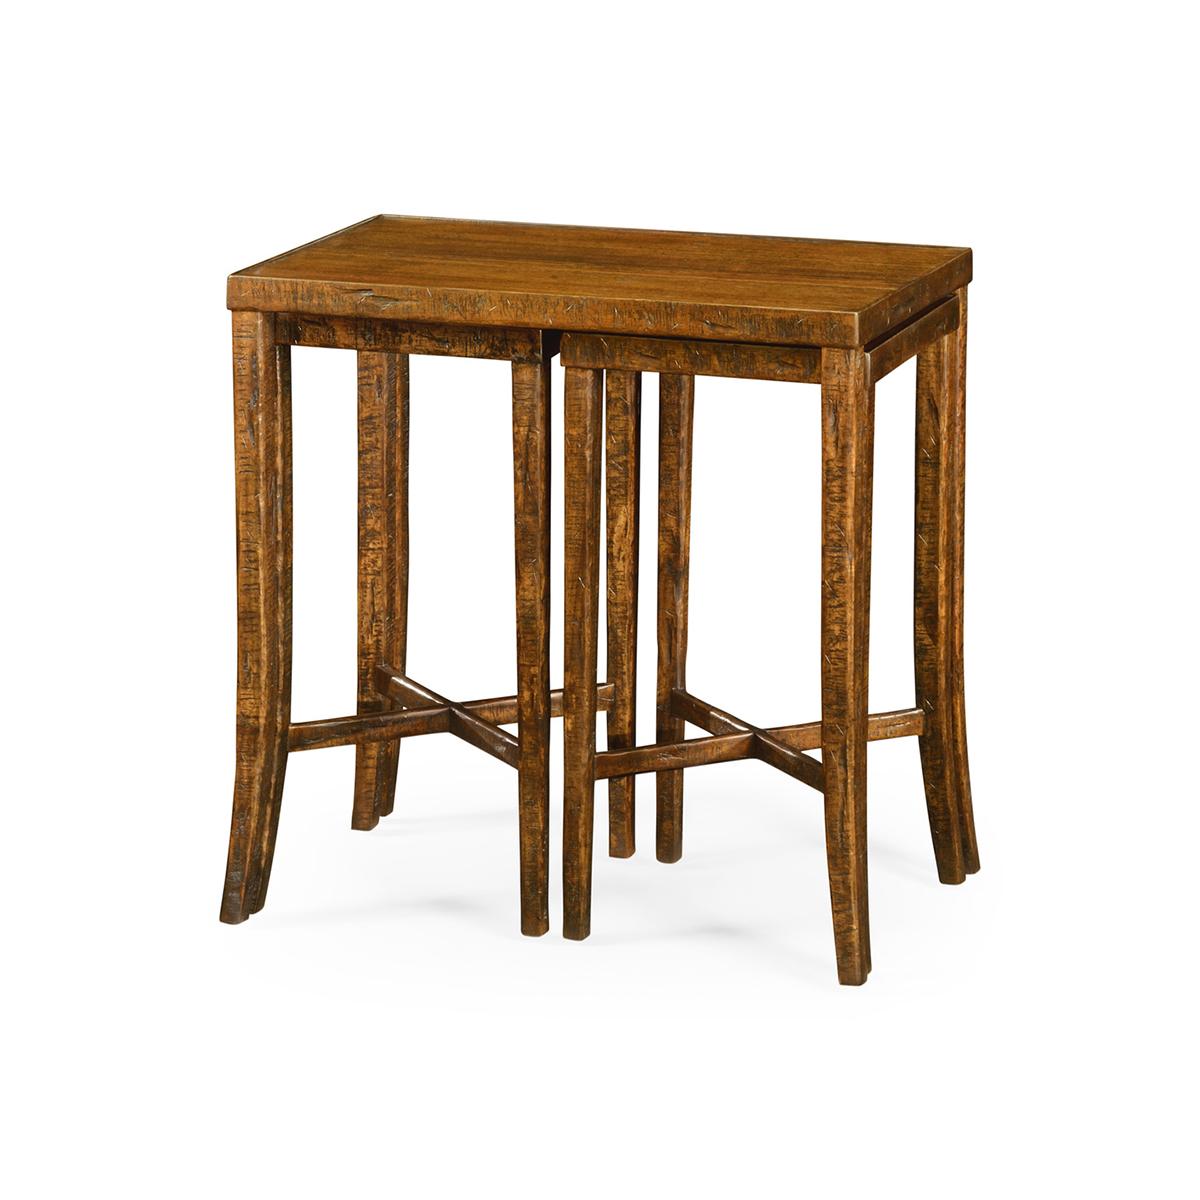 Rustic country nesting tables, these walnut finish nesting cocktail tables feature two smaller tables that fit under the main cocktail table.

Dimensions: 28